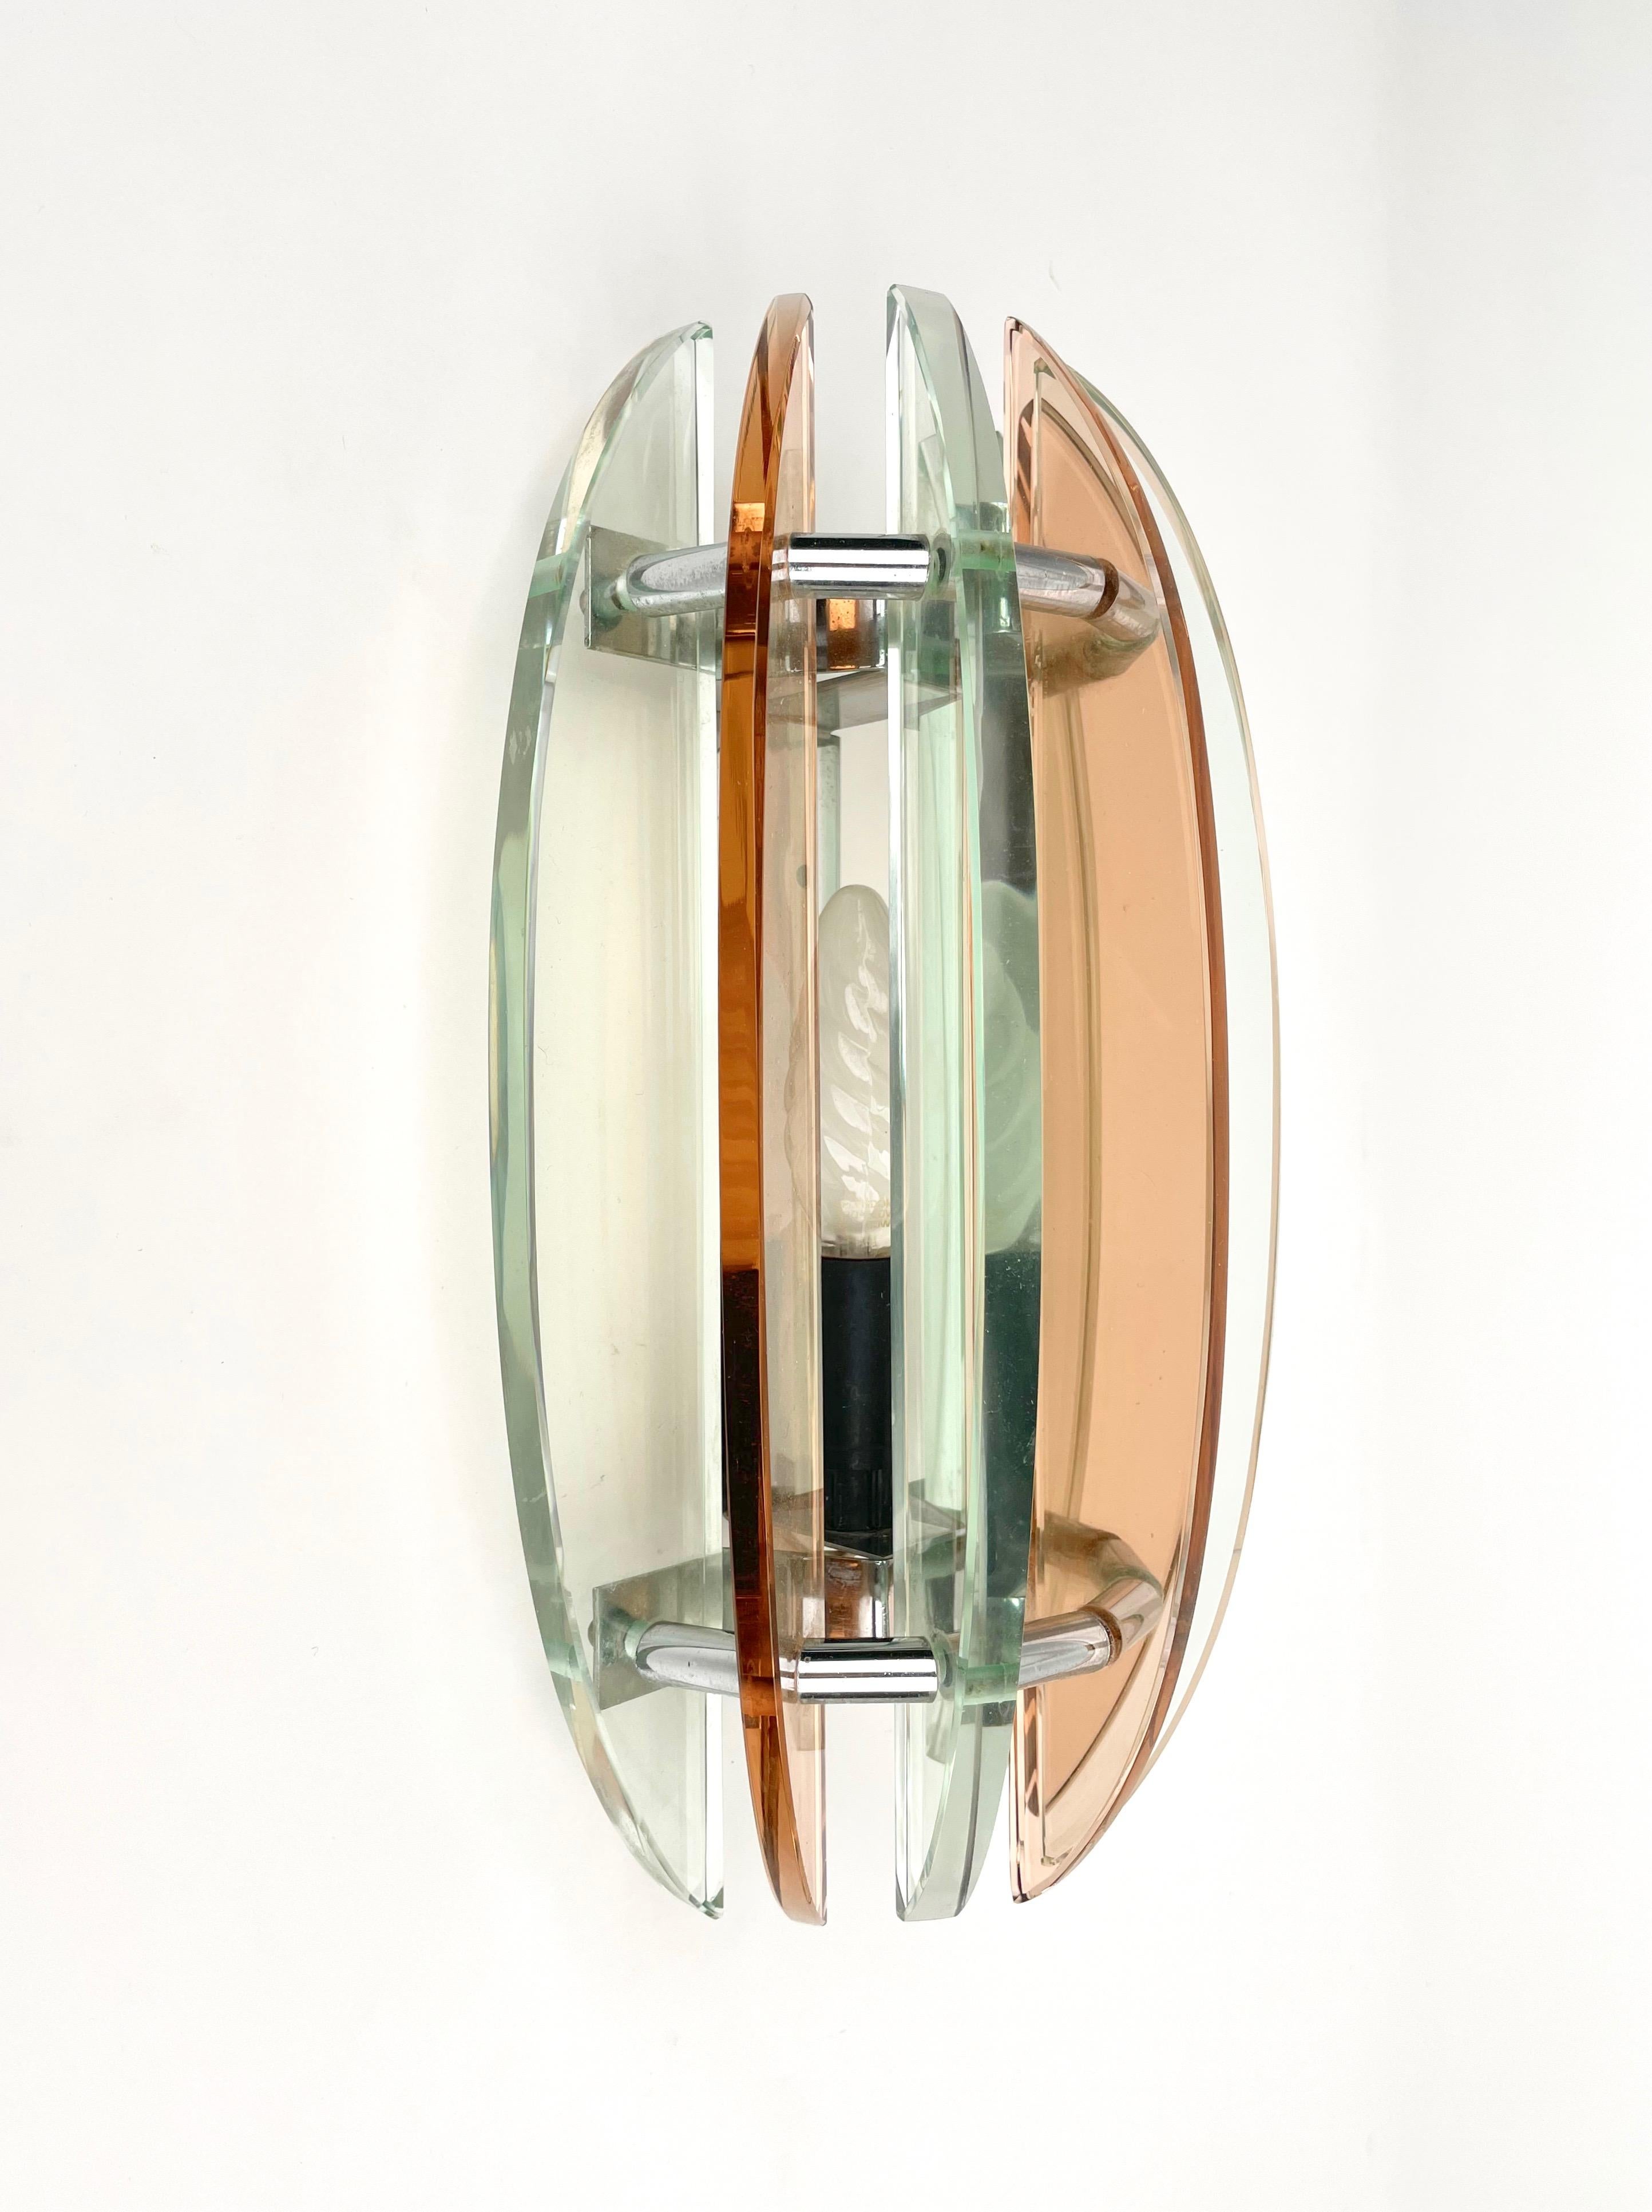 Late 20th Century Pair of Wall Sconces in Colored Glass and Chrome by Veca, Italy, 1970s